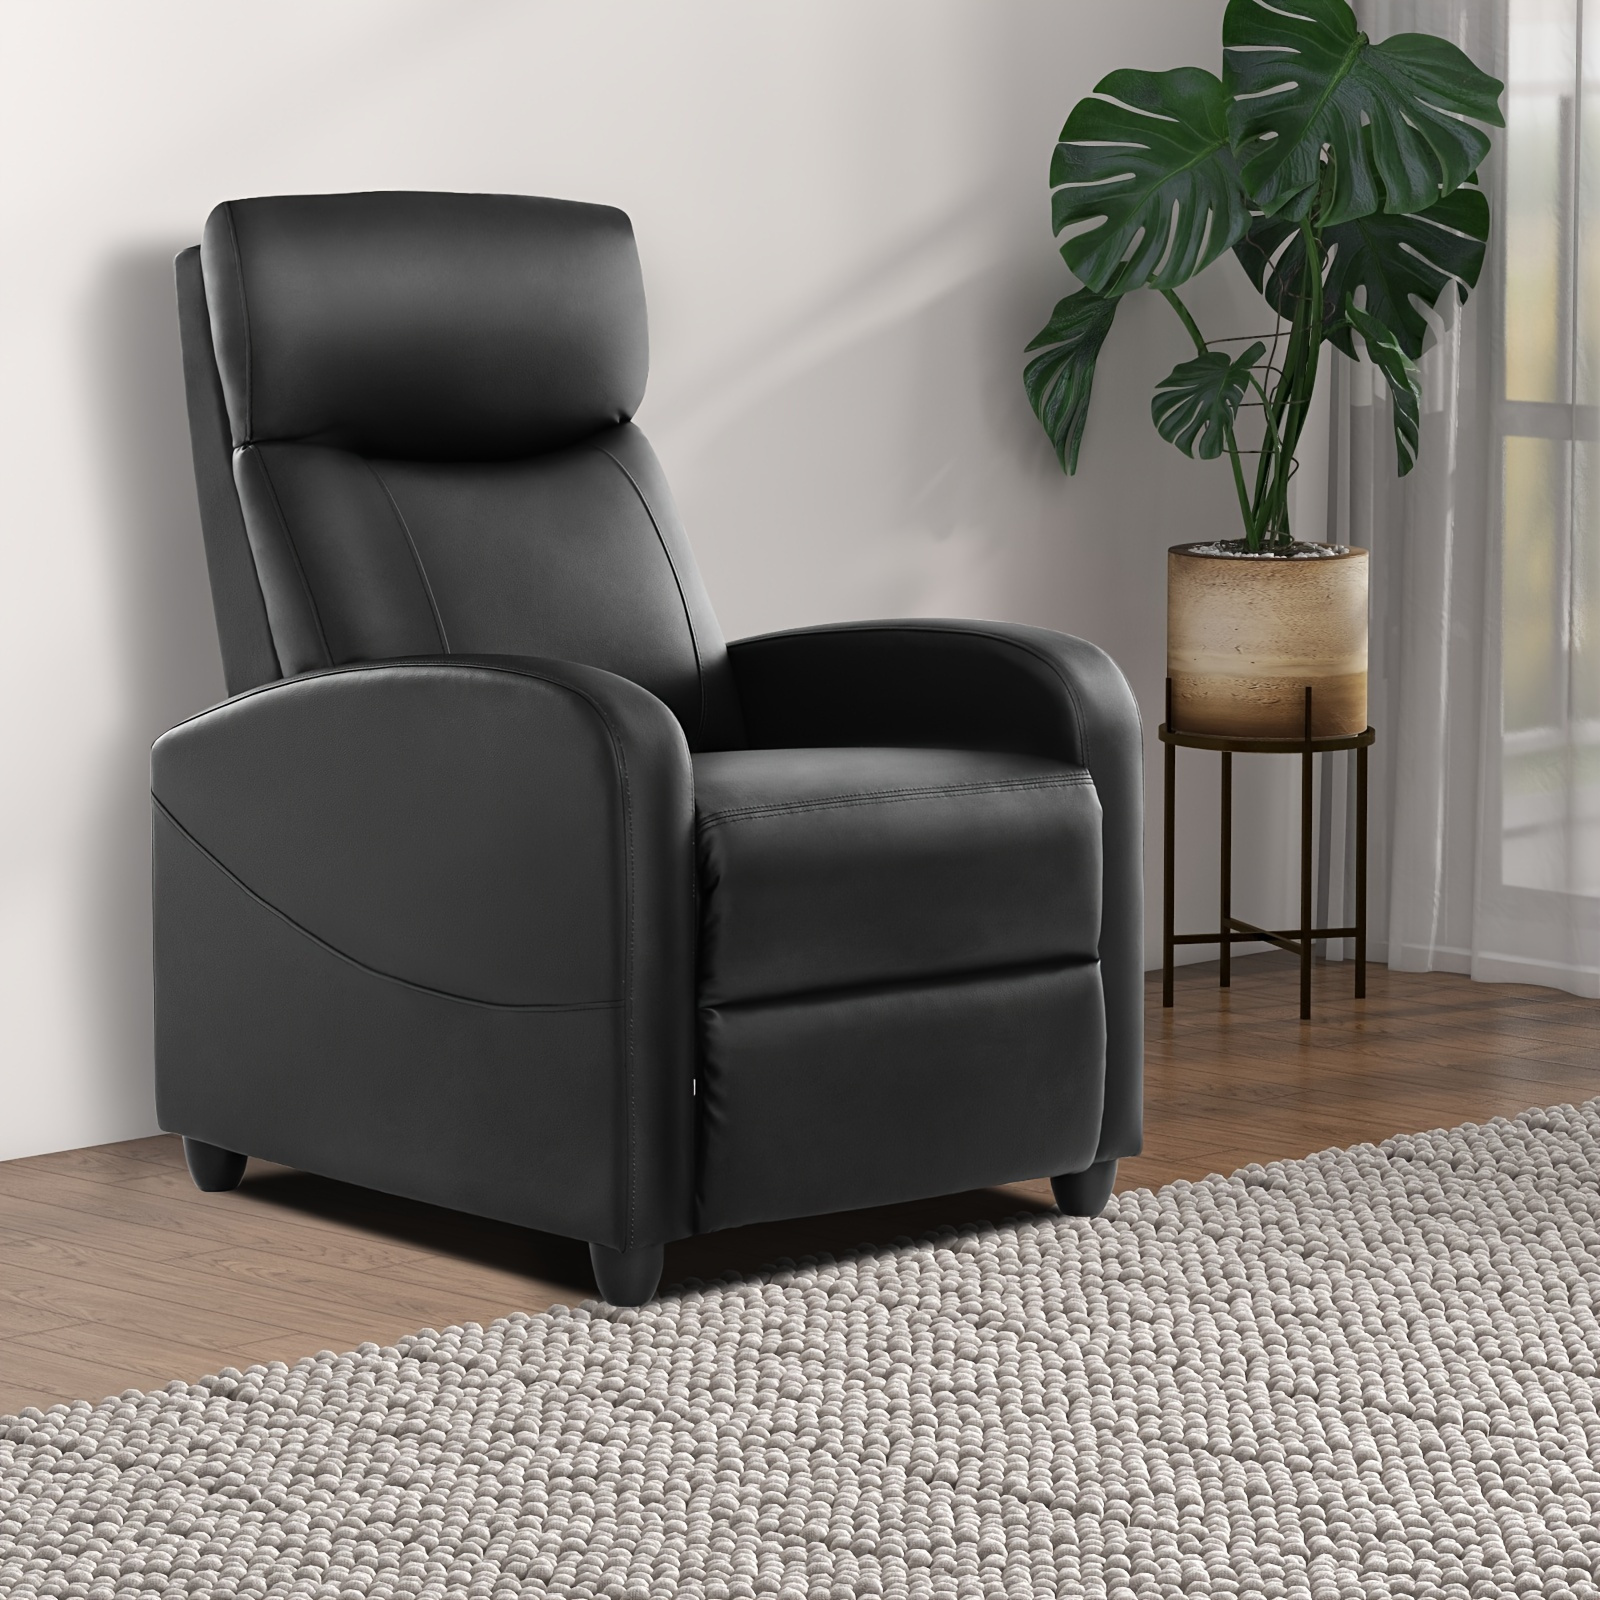 

Single Pu Leather Massage Chair, Single Sofa Recliner For Adults, Ideal For Living Room And Bedroom, Equipped With Lumbar Support, Adjustable Backrest And Footrest